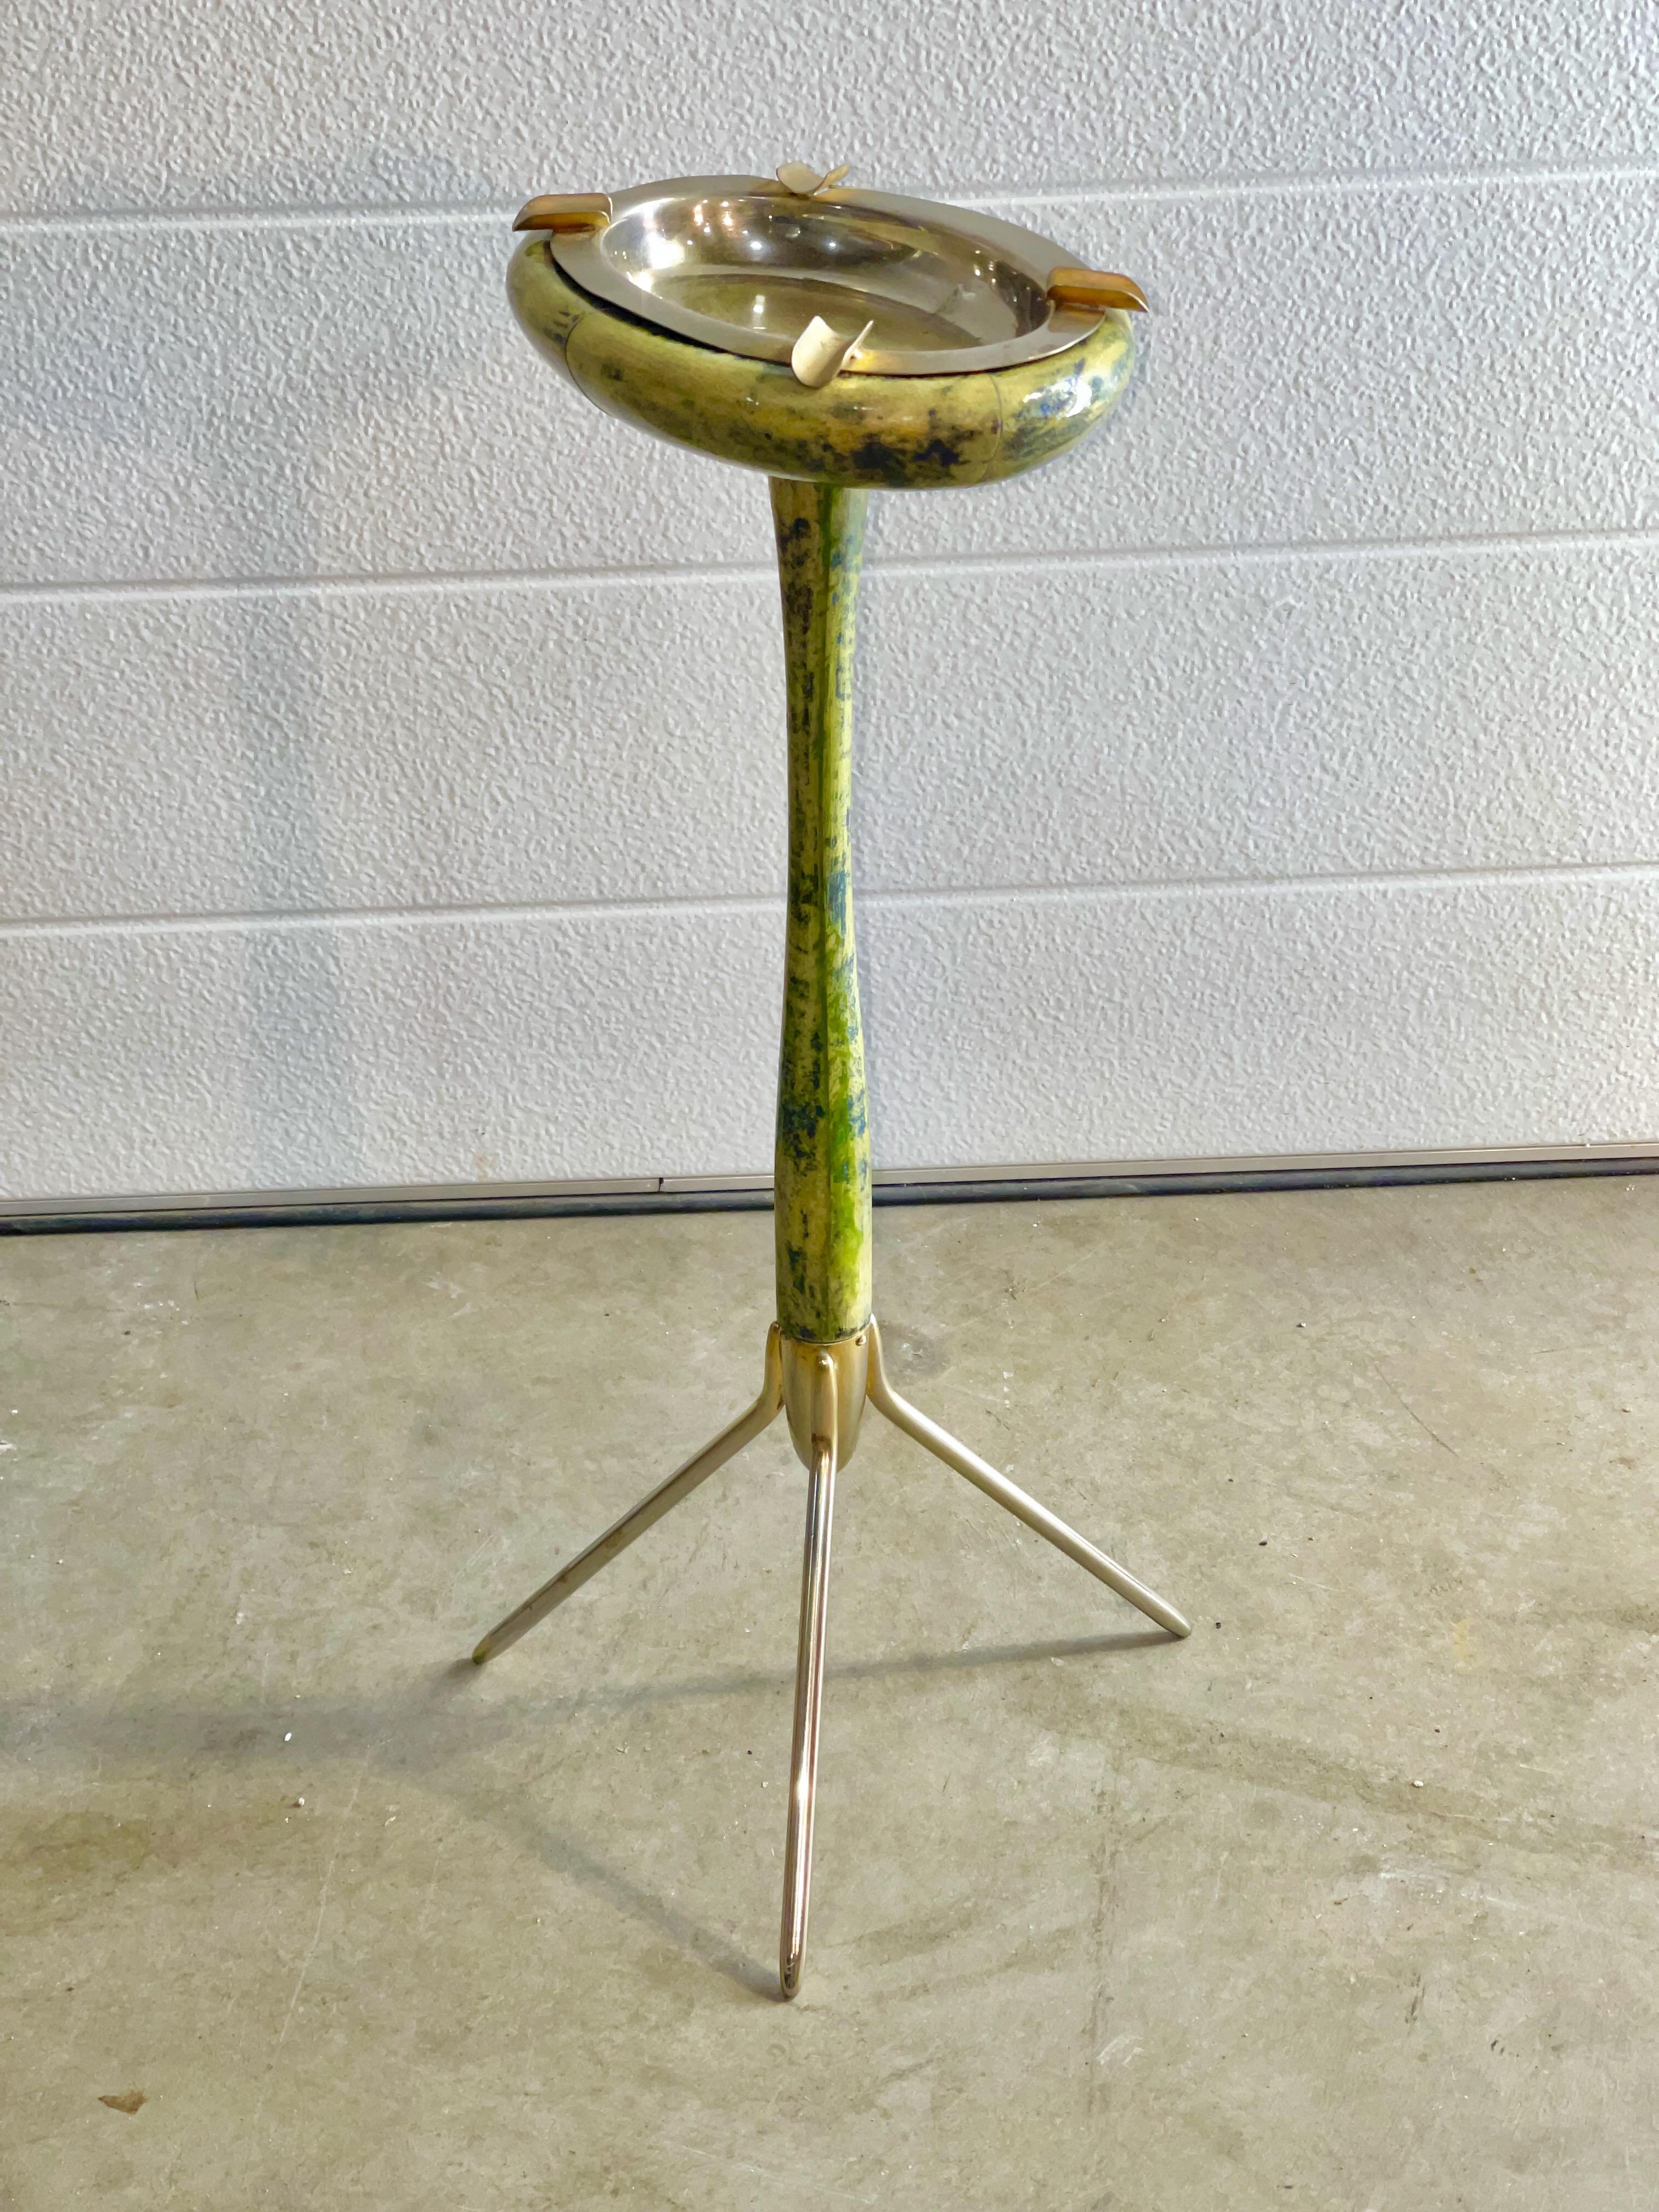 Aldo Tura 1960s standing ashtray or vide poche made of wood applied with lacquered goatskin in green pigment dye with dark speckles mounted in a solid brass tripod Stand. Brass finished removable ashtray. Residue of original Tura label present. A